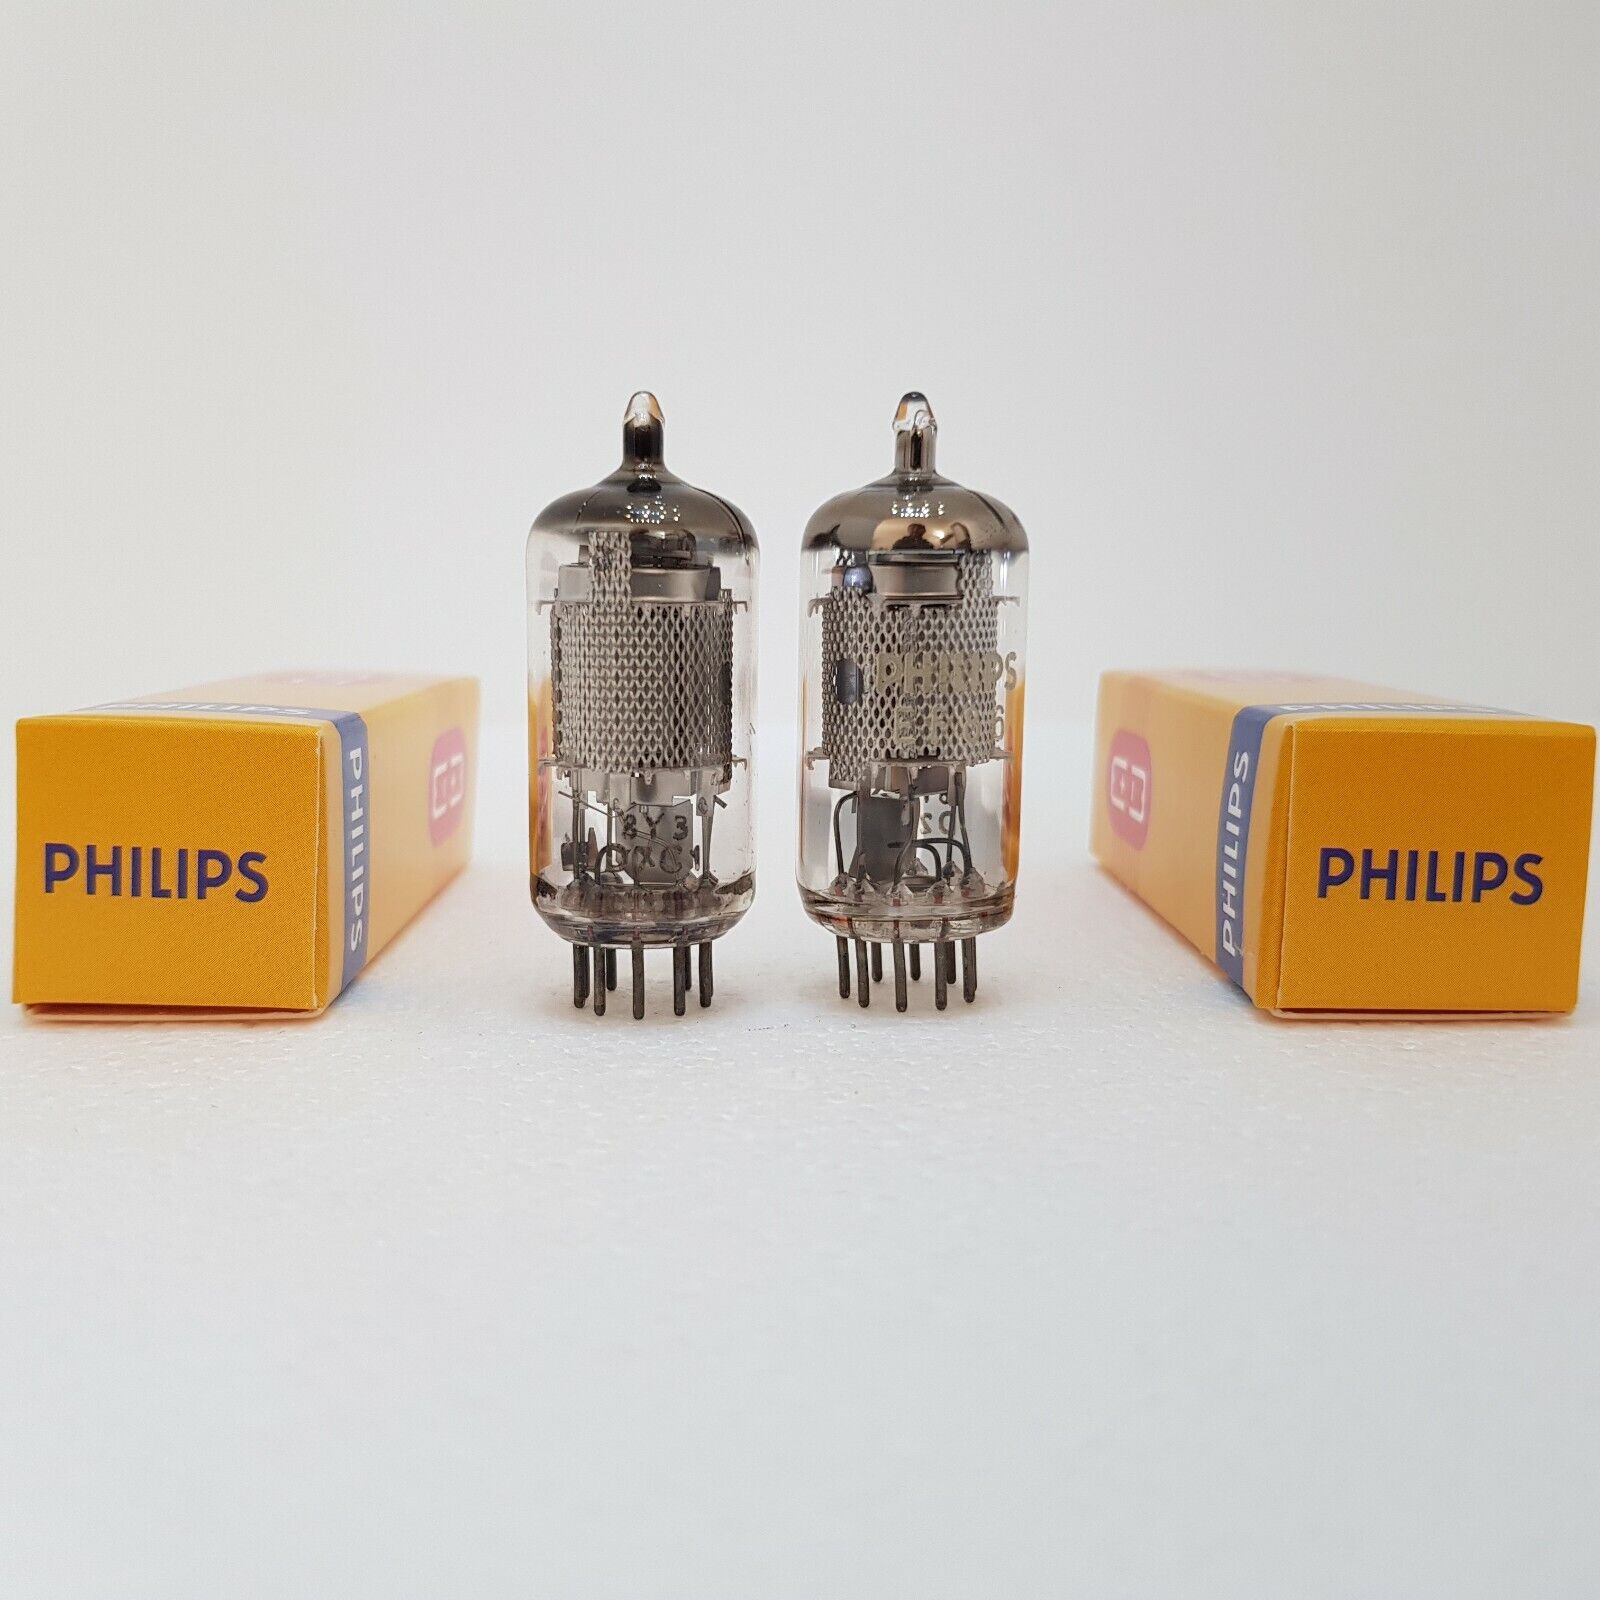 2x Ef86 Philips 8y3,mesh Plate,hamburg,early70s,tested Tv7